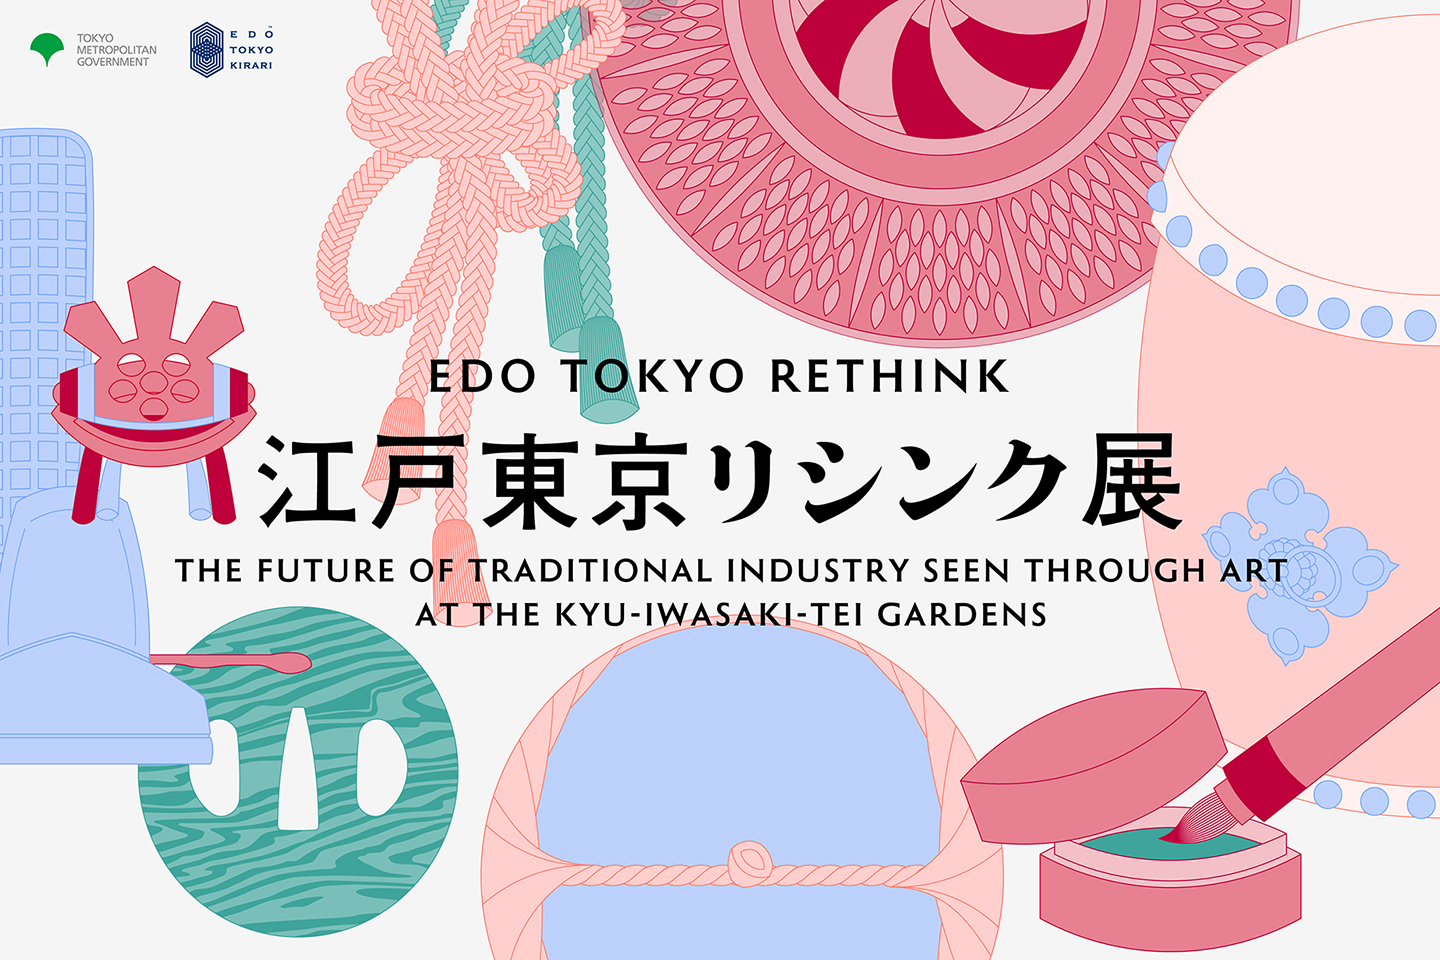 【Edo Tokyo Rethink】Special site is now open